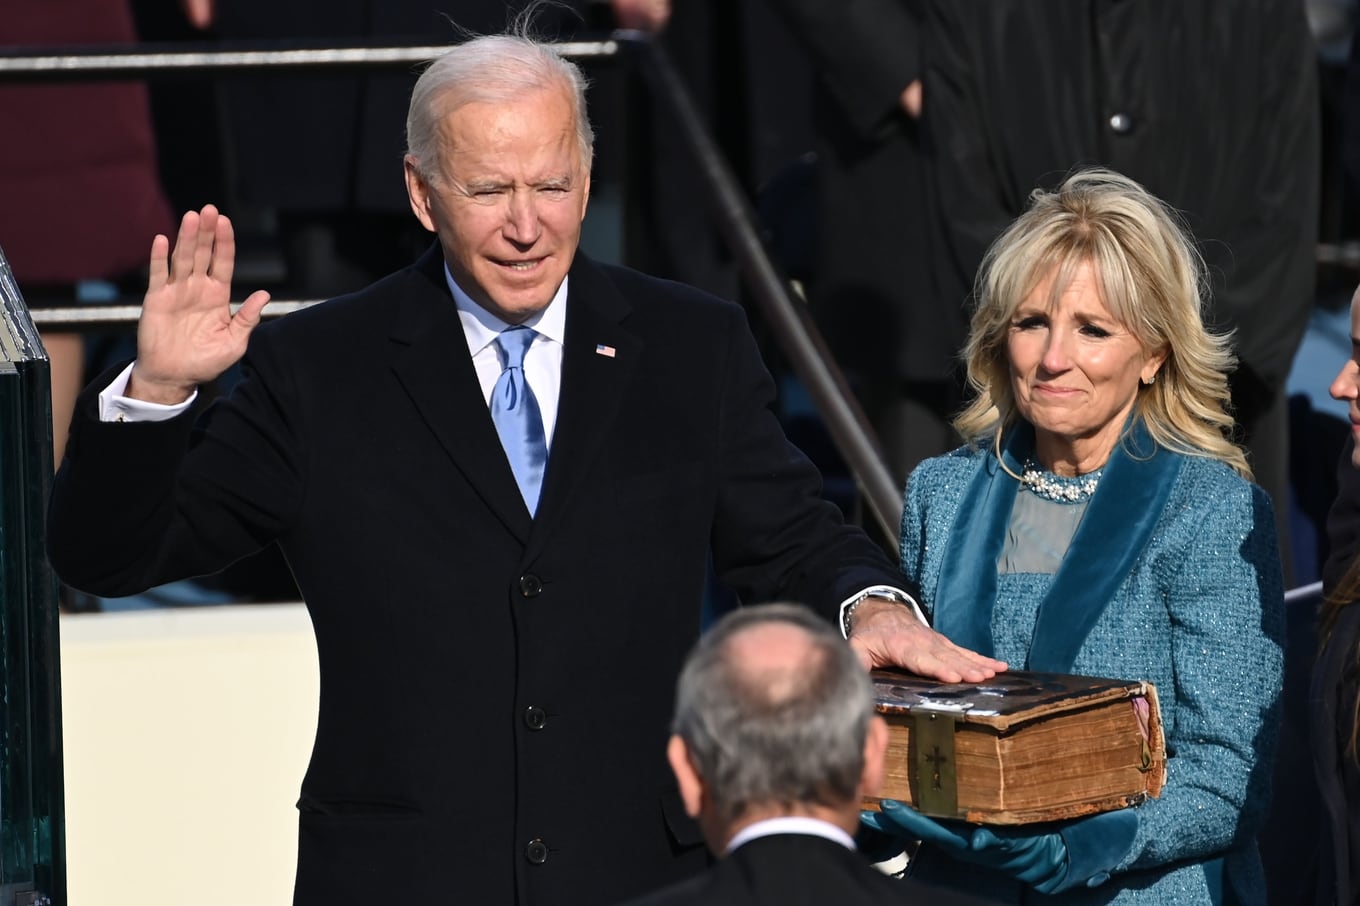 Joe Biden (L), flanked by incoming US First Lady Jill Biden is sworn in as the 46th US President by Supreme Court Chief Justice John Roberts on January 20, 2021, at the US Capitol in Washington, DC. (Photo by SAUL LOEB / POOL / AFP)